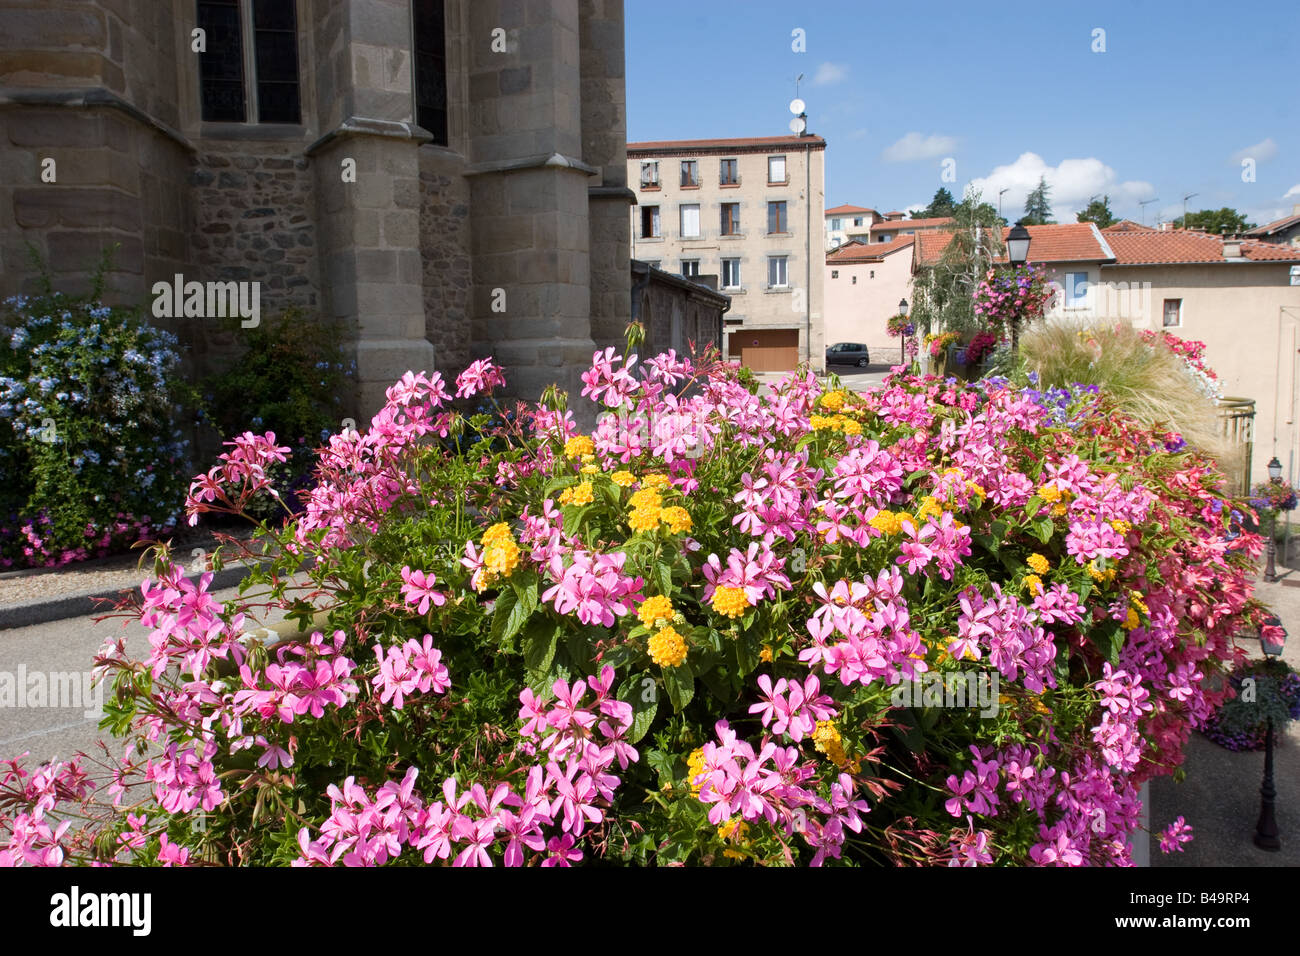 Flower displays in streets of Saint Galmier hilltop town in the Loire region of France Stock Photo